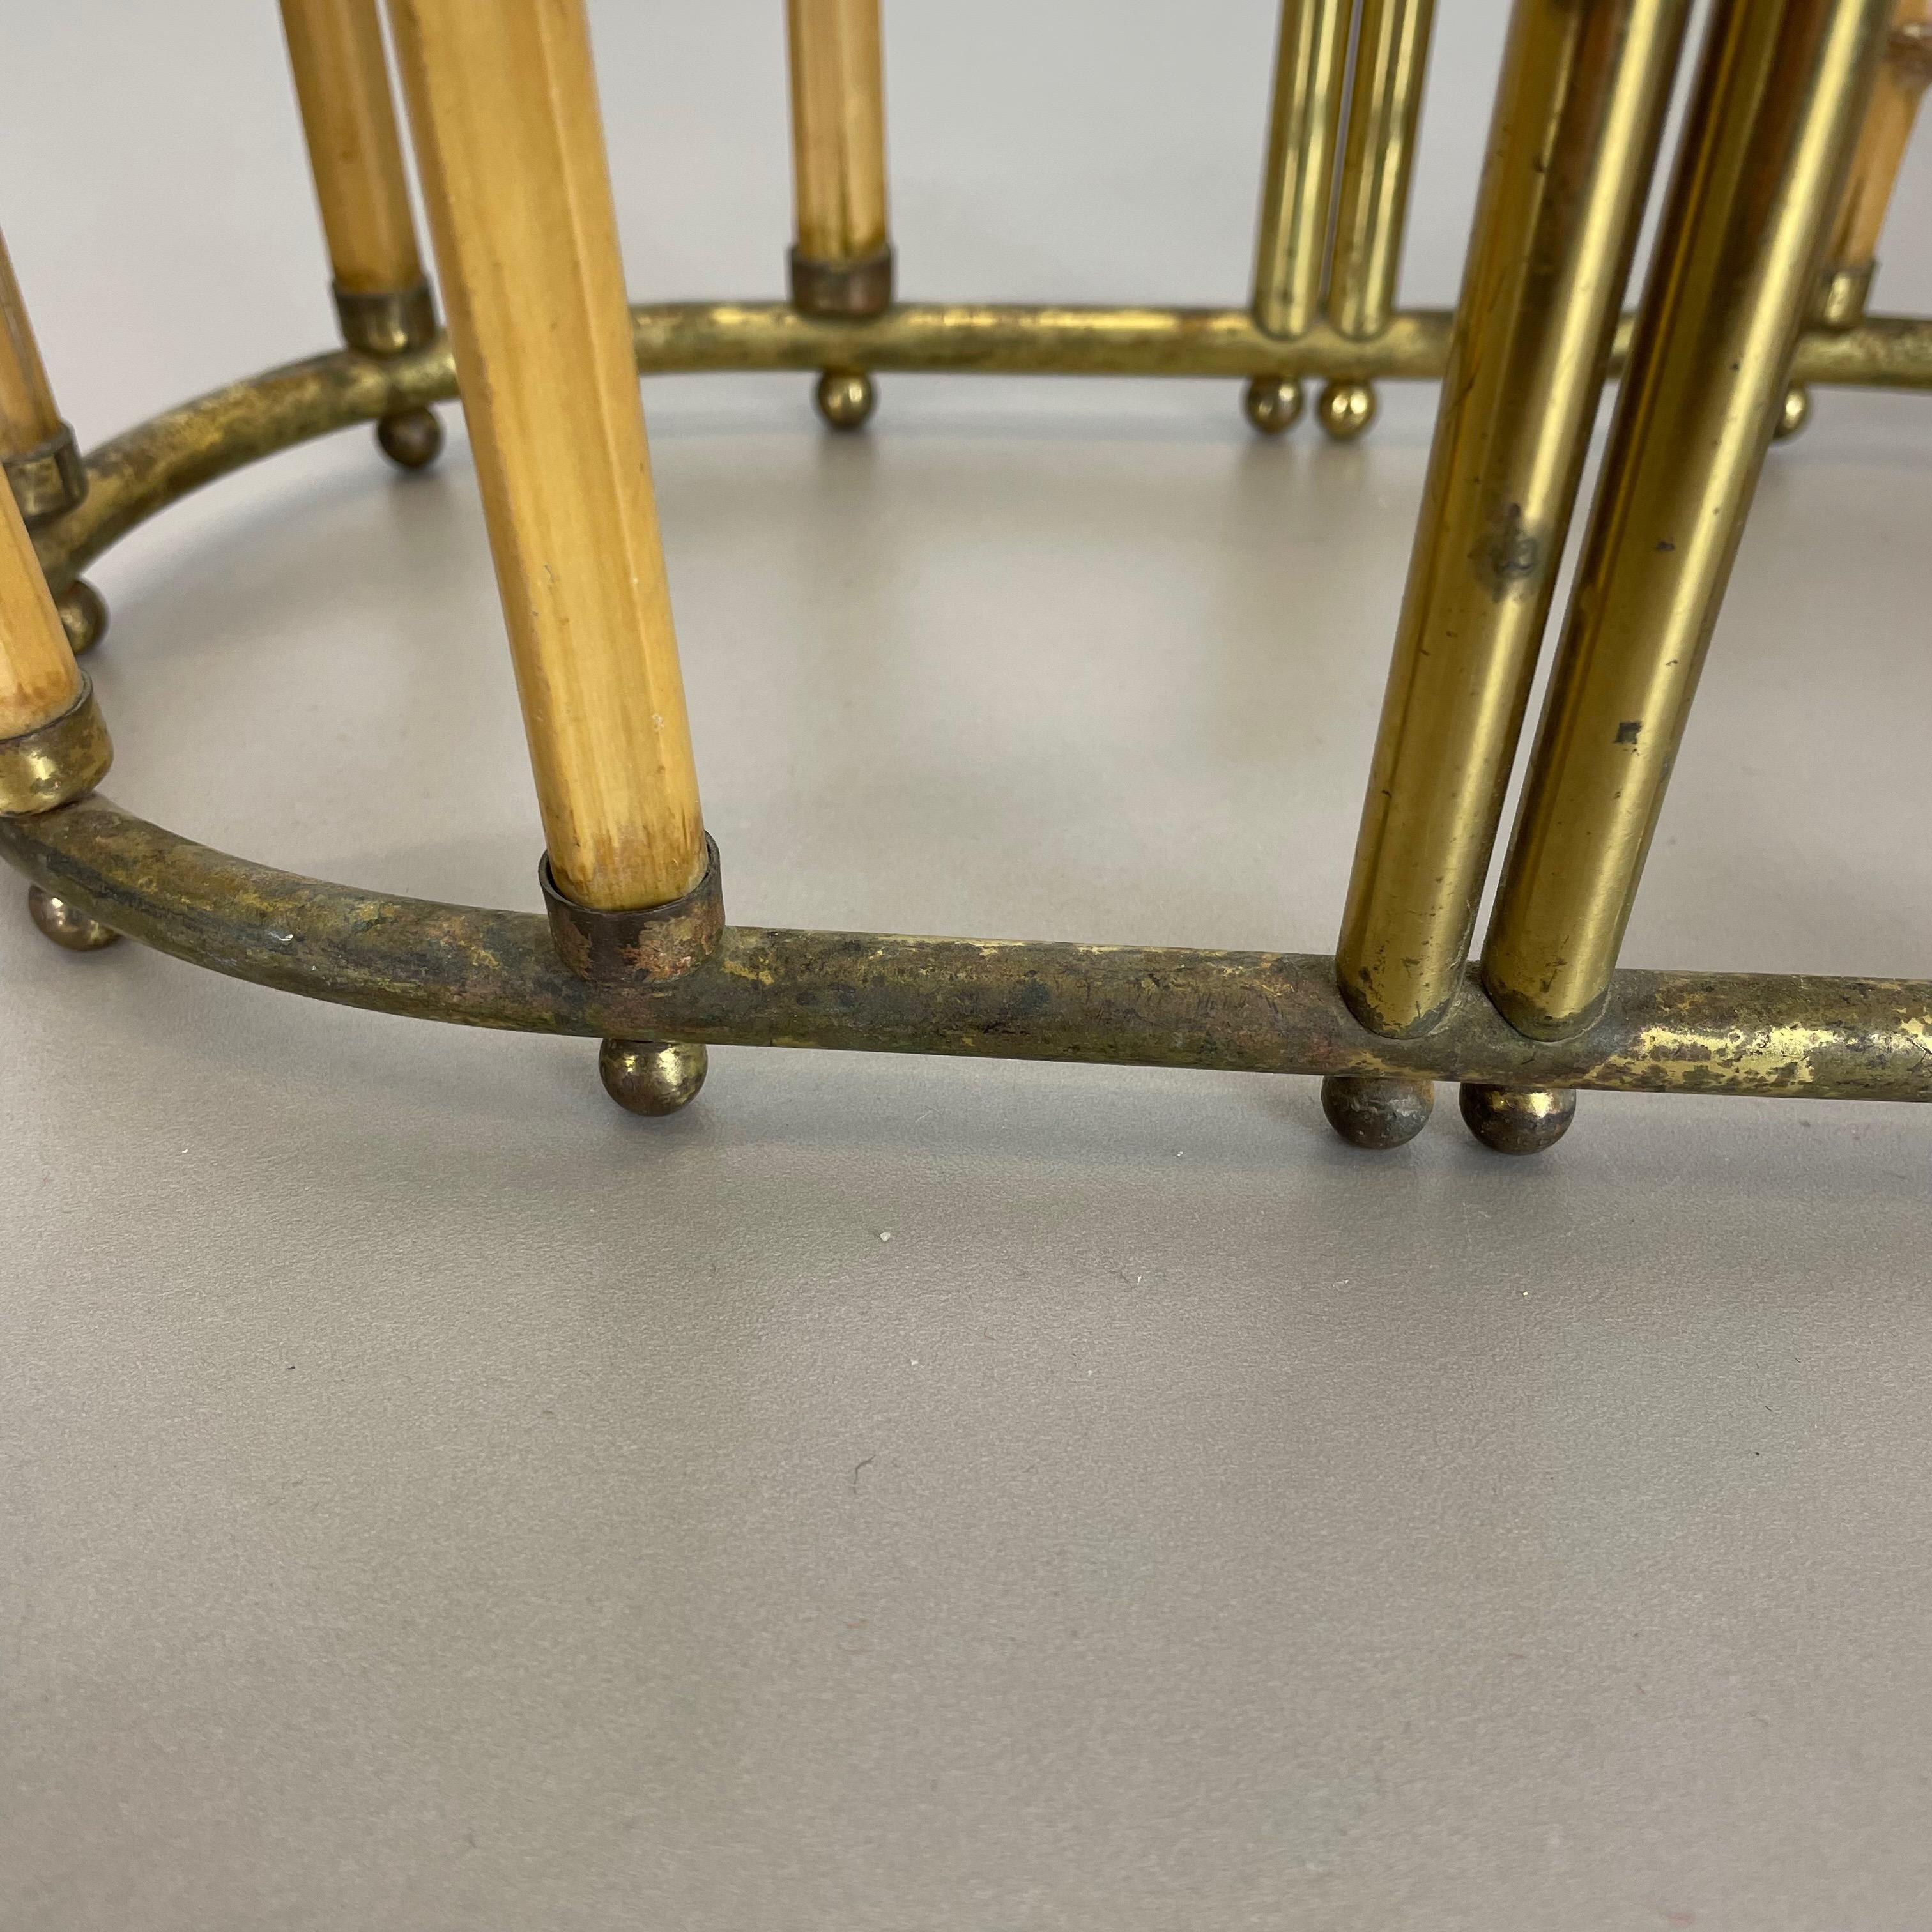 Hollywood Regency Auböck Style Brass Bamboo Umbrella Stand, Austria, 1950s For Sale 12